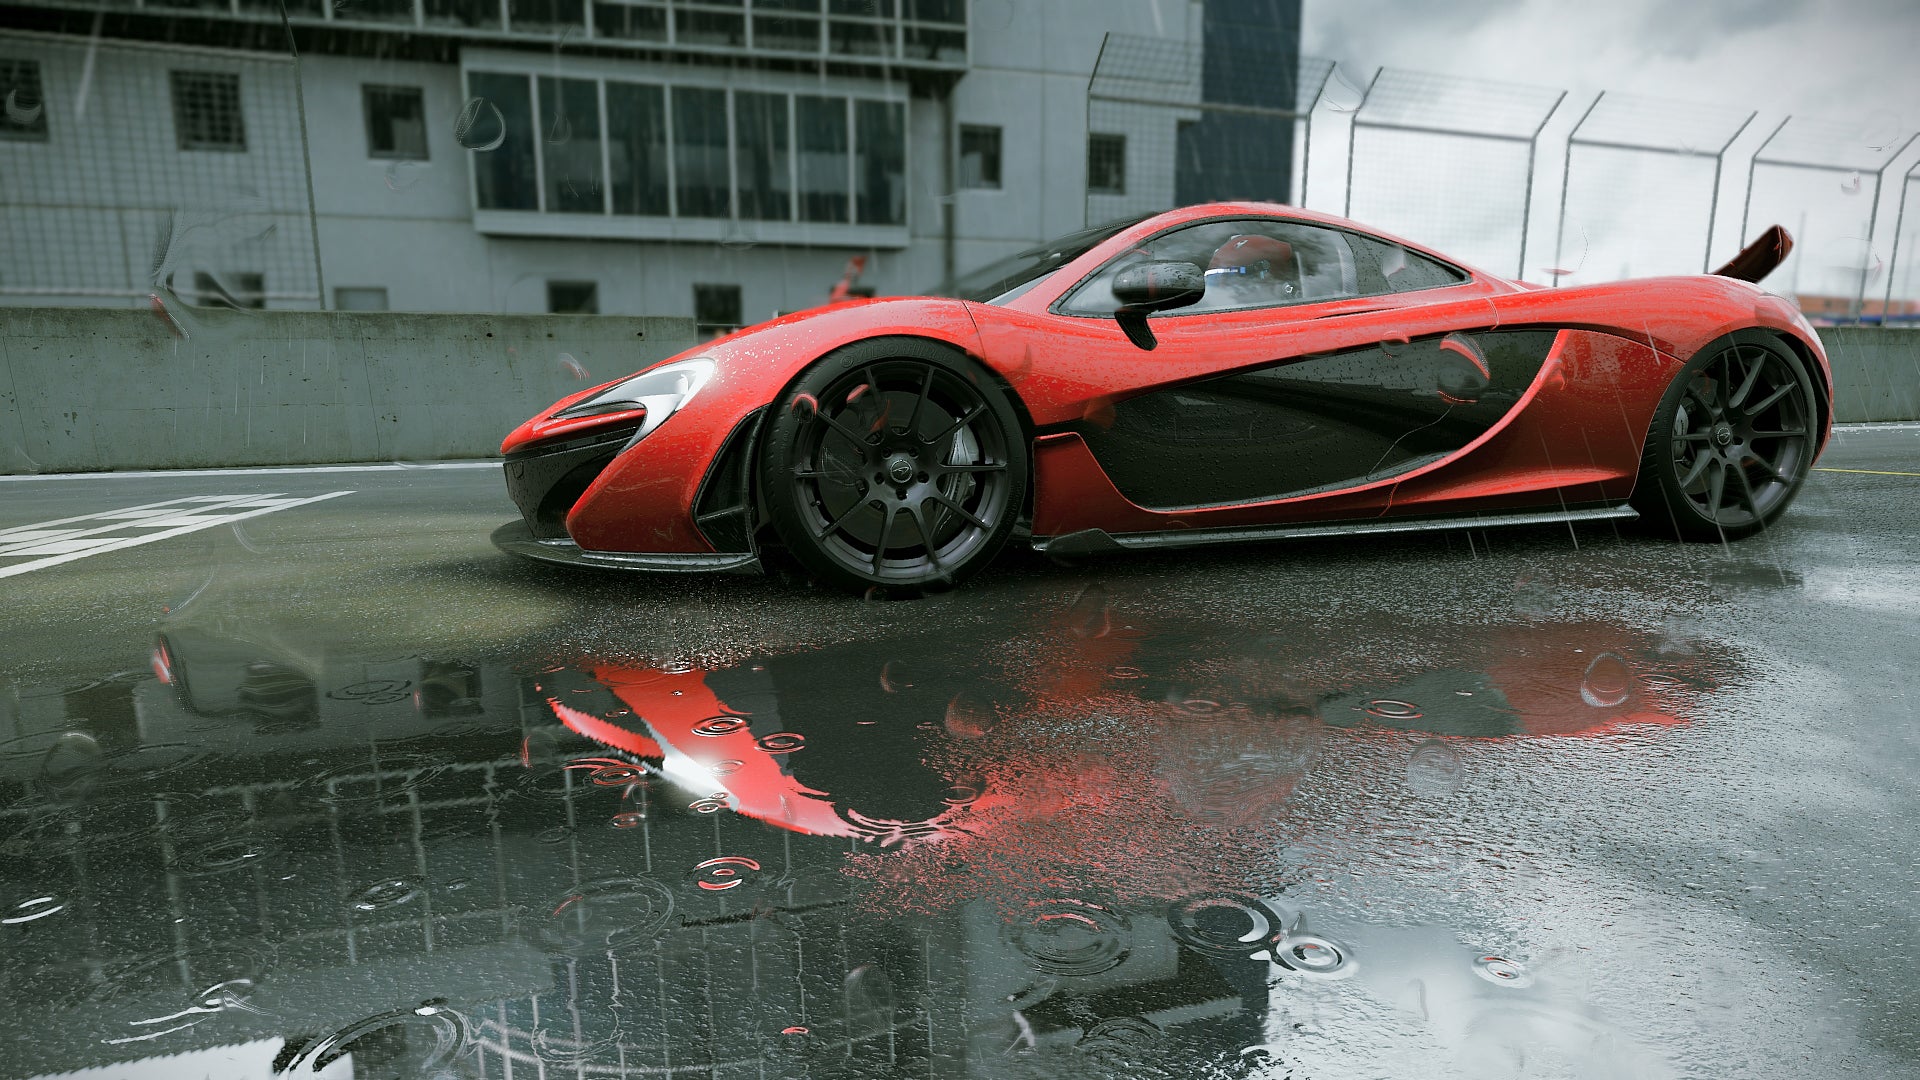 Image for PS4 Pro Boost Mode: Project Cars, Assetto Corsa and F1 2016 Tested!